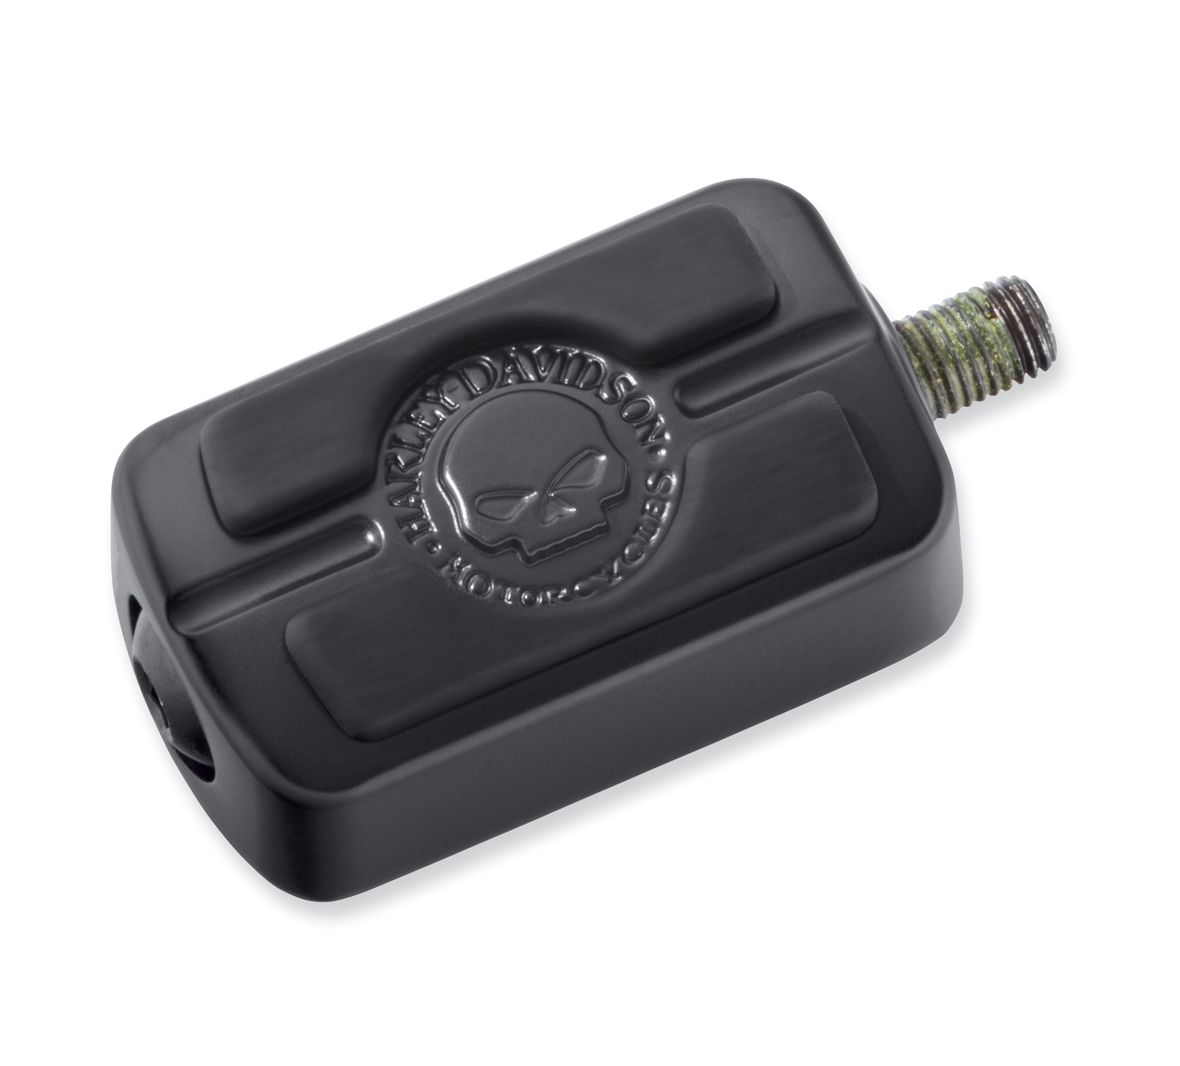 Harley-Davidson® Willie G Skull Shifter Peg - Black - 33500258  Styled to complement Willie G® Skull Accessory items, these obsidian black Shifter Peg features a raised Willie G® Skull and Harley-Davidson® Motorcycles script surrounded by rich black rubber for grip and traction.